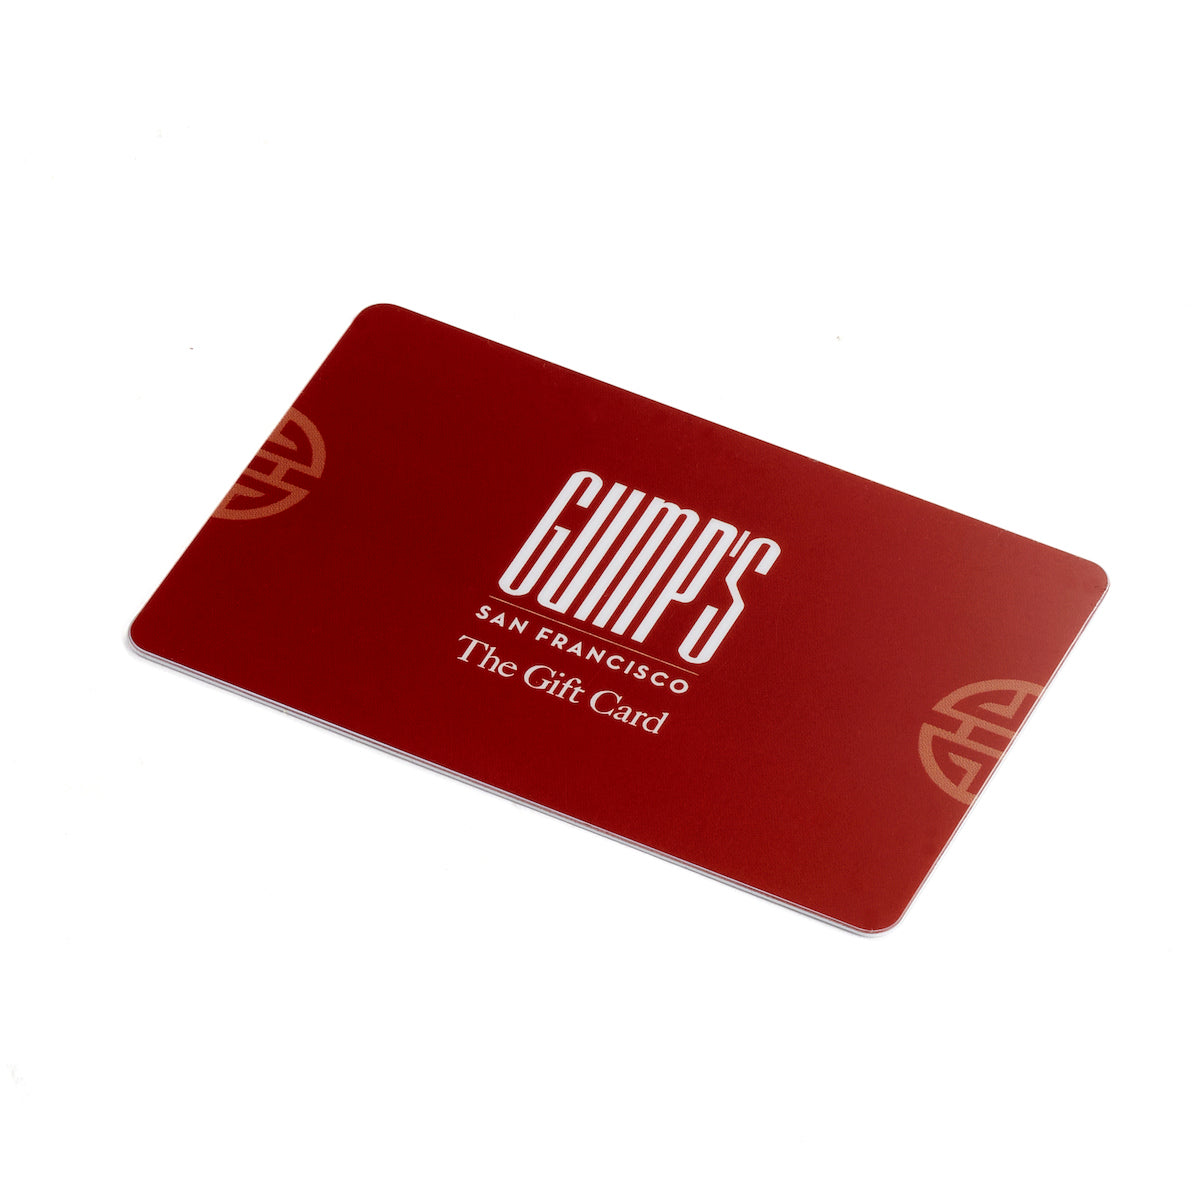 The Gump's Gift Card $1,000